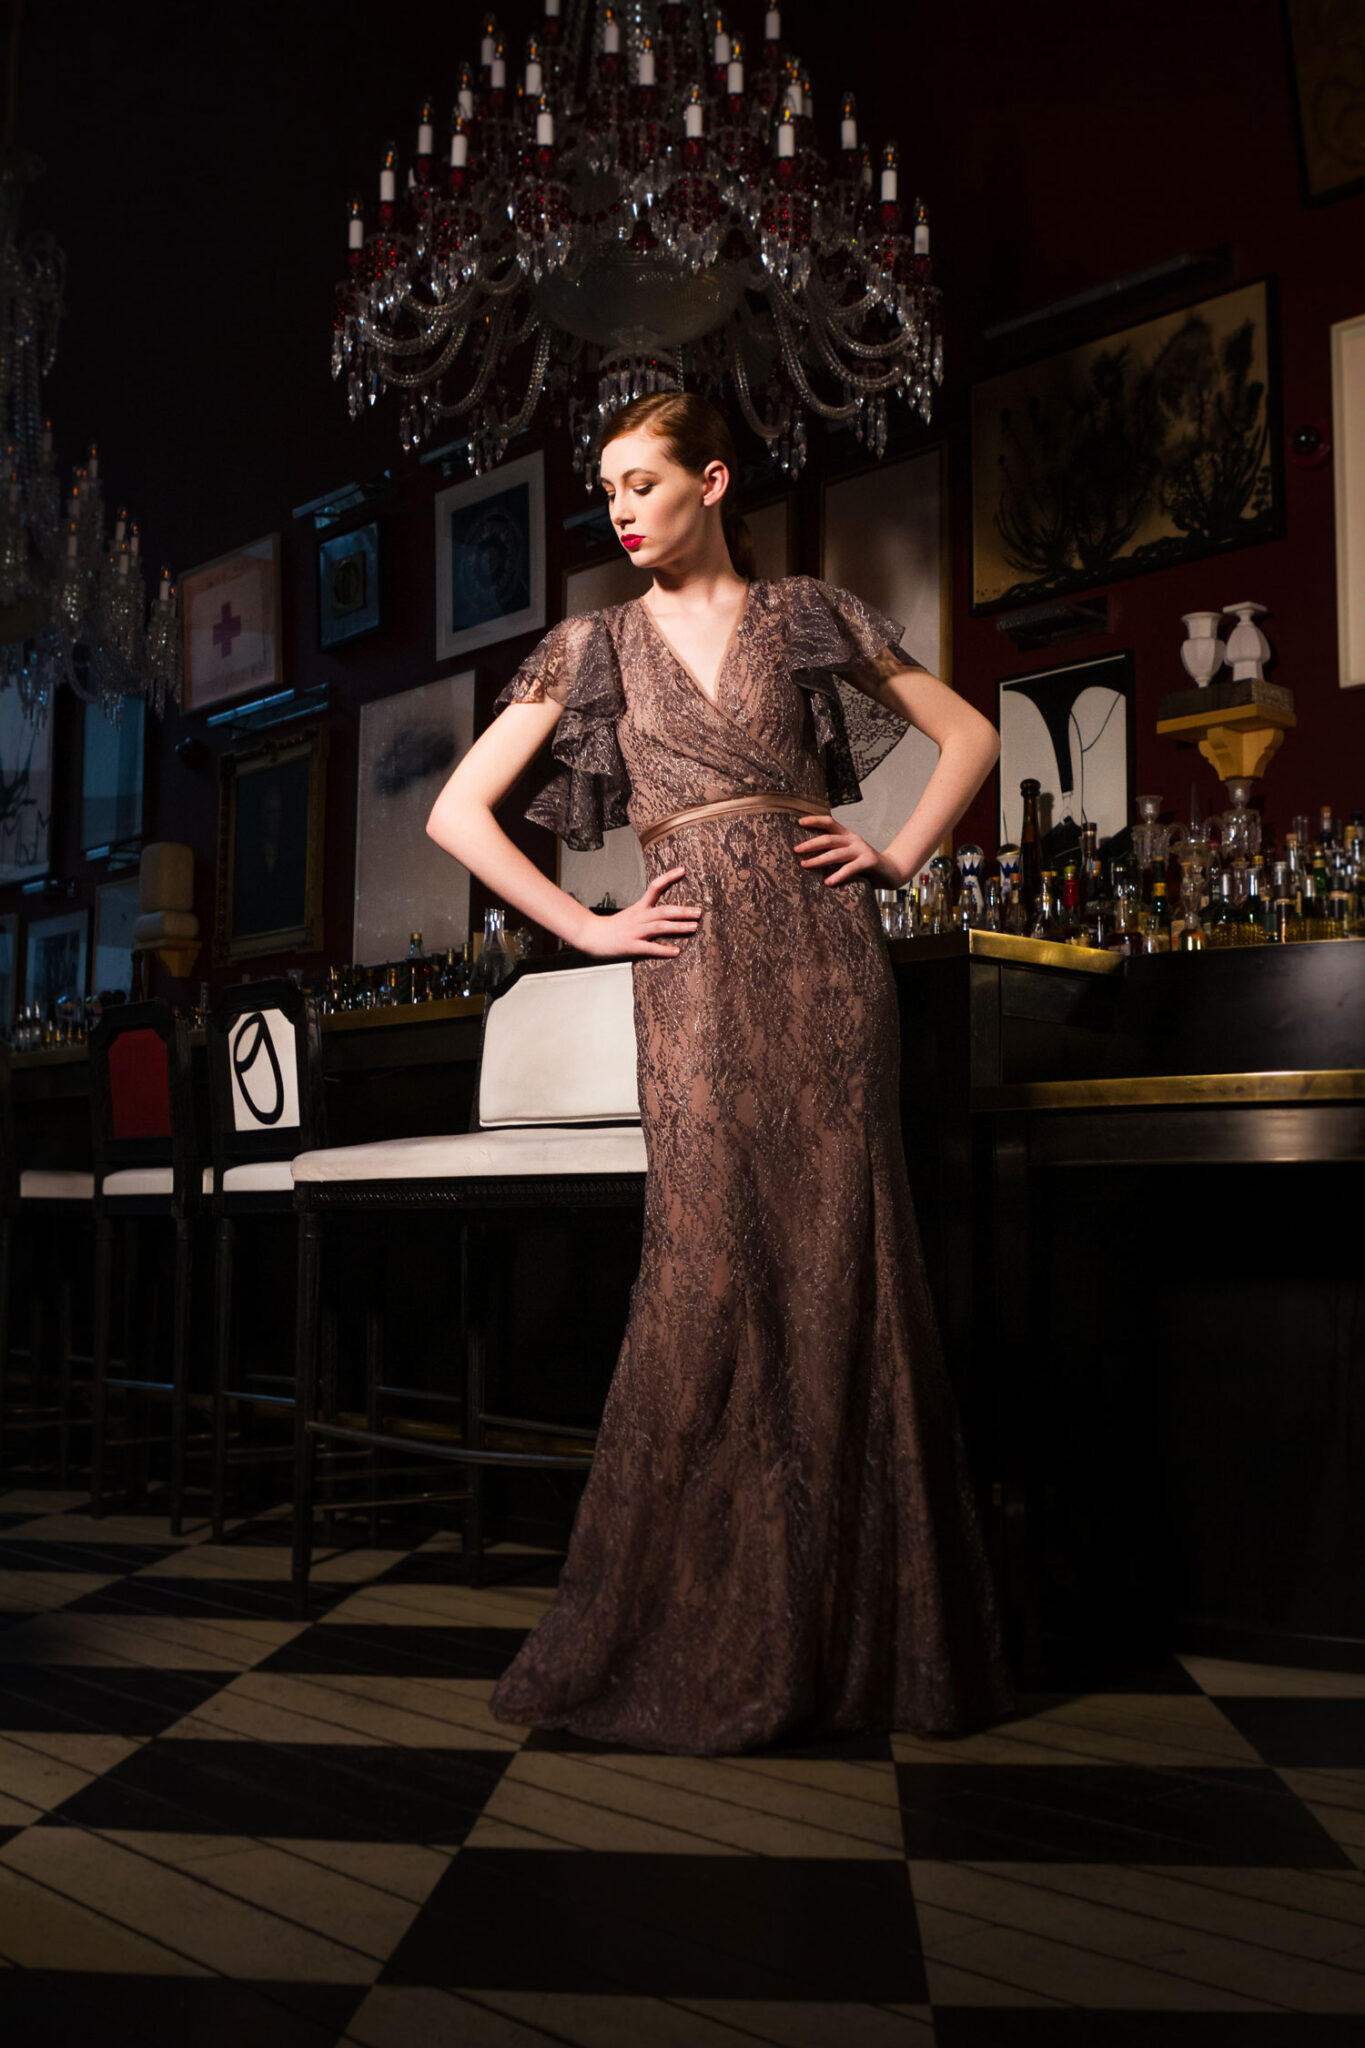 Promises Look 5 - Maxi dress with gold details and transparencies - Verdin New York